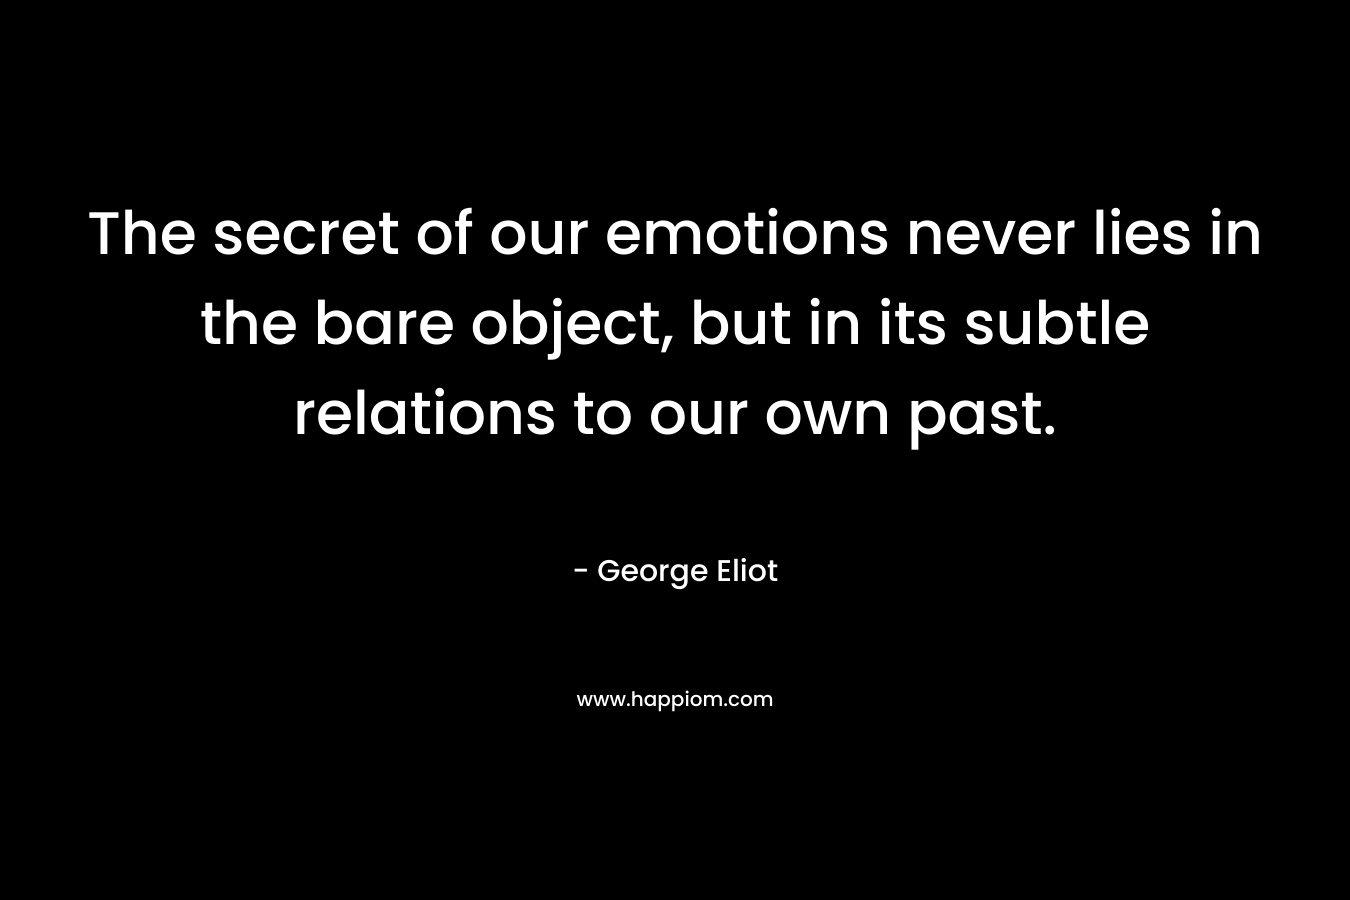 The secret of our emotions never lies in the bare object, but in its subtle relations to our own past. – George Eliot